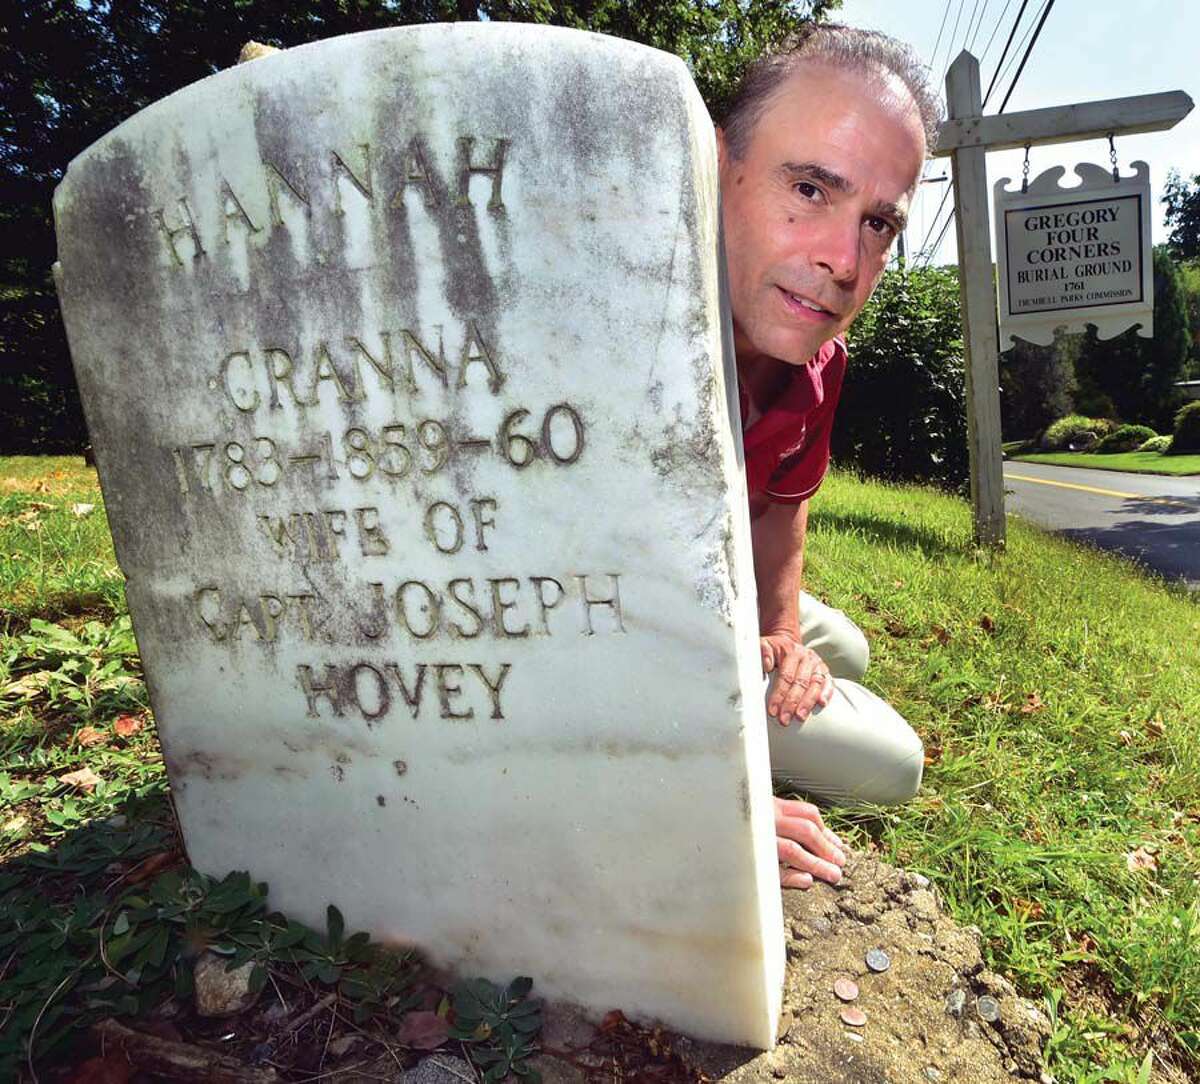 Lennie Grimaldi, author of Connecticut Characters: Personalities Spicing Up the Nutmeg State, at the gravesite of a “witch” named Hannah Cranna at Gregory’s Four Corners Burial Ground on Spring Hill Road in Trumbull. Cranna placed a curse on Monroe, according to legend.